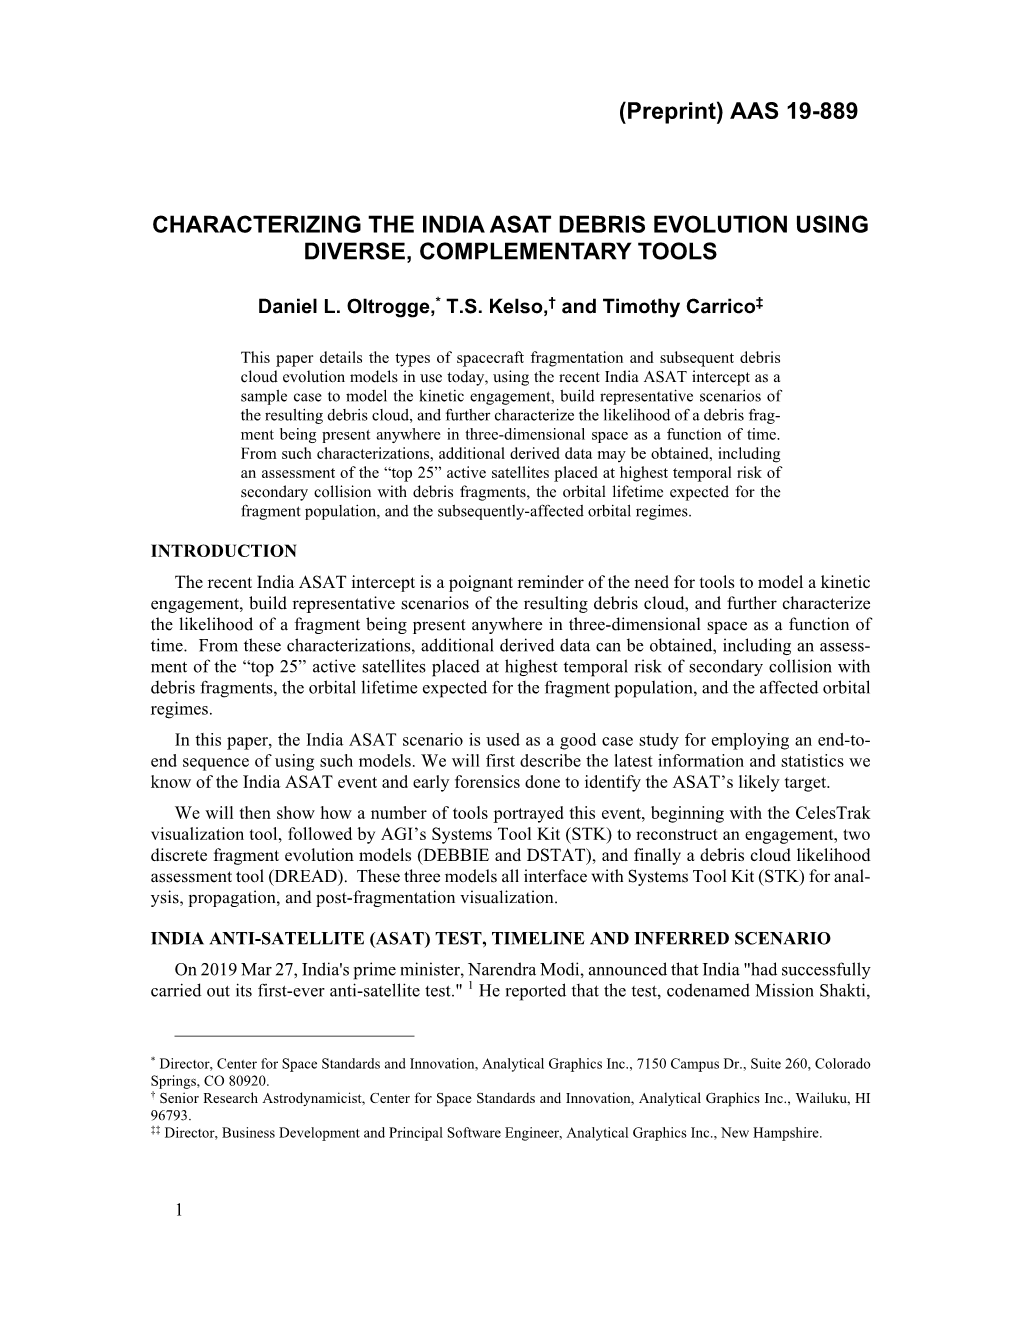 Characterizing the India Asat Debris Evolution Using Diverse, Complementary Tools